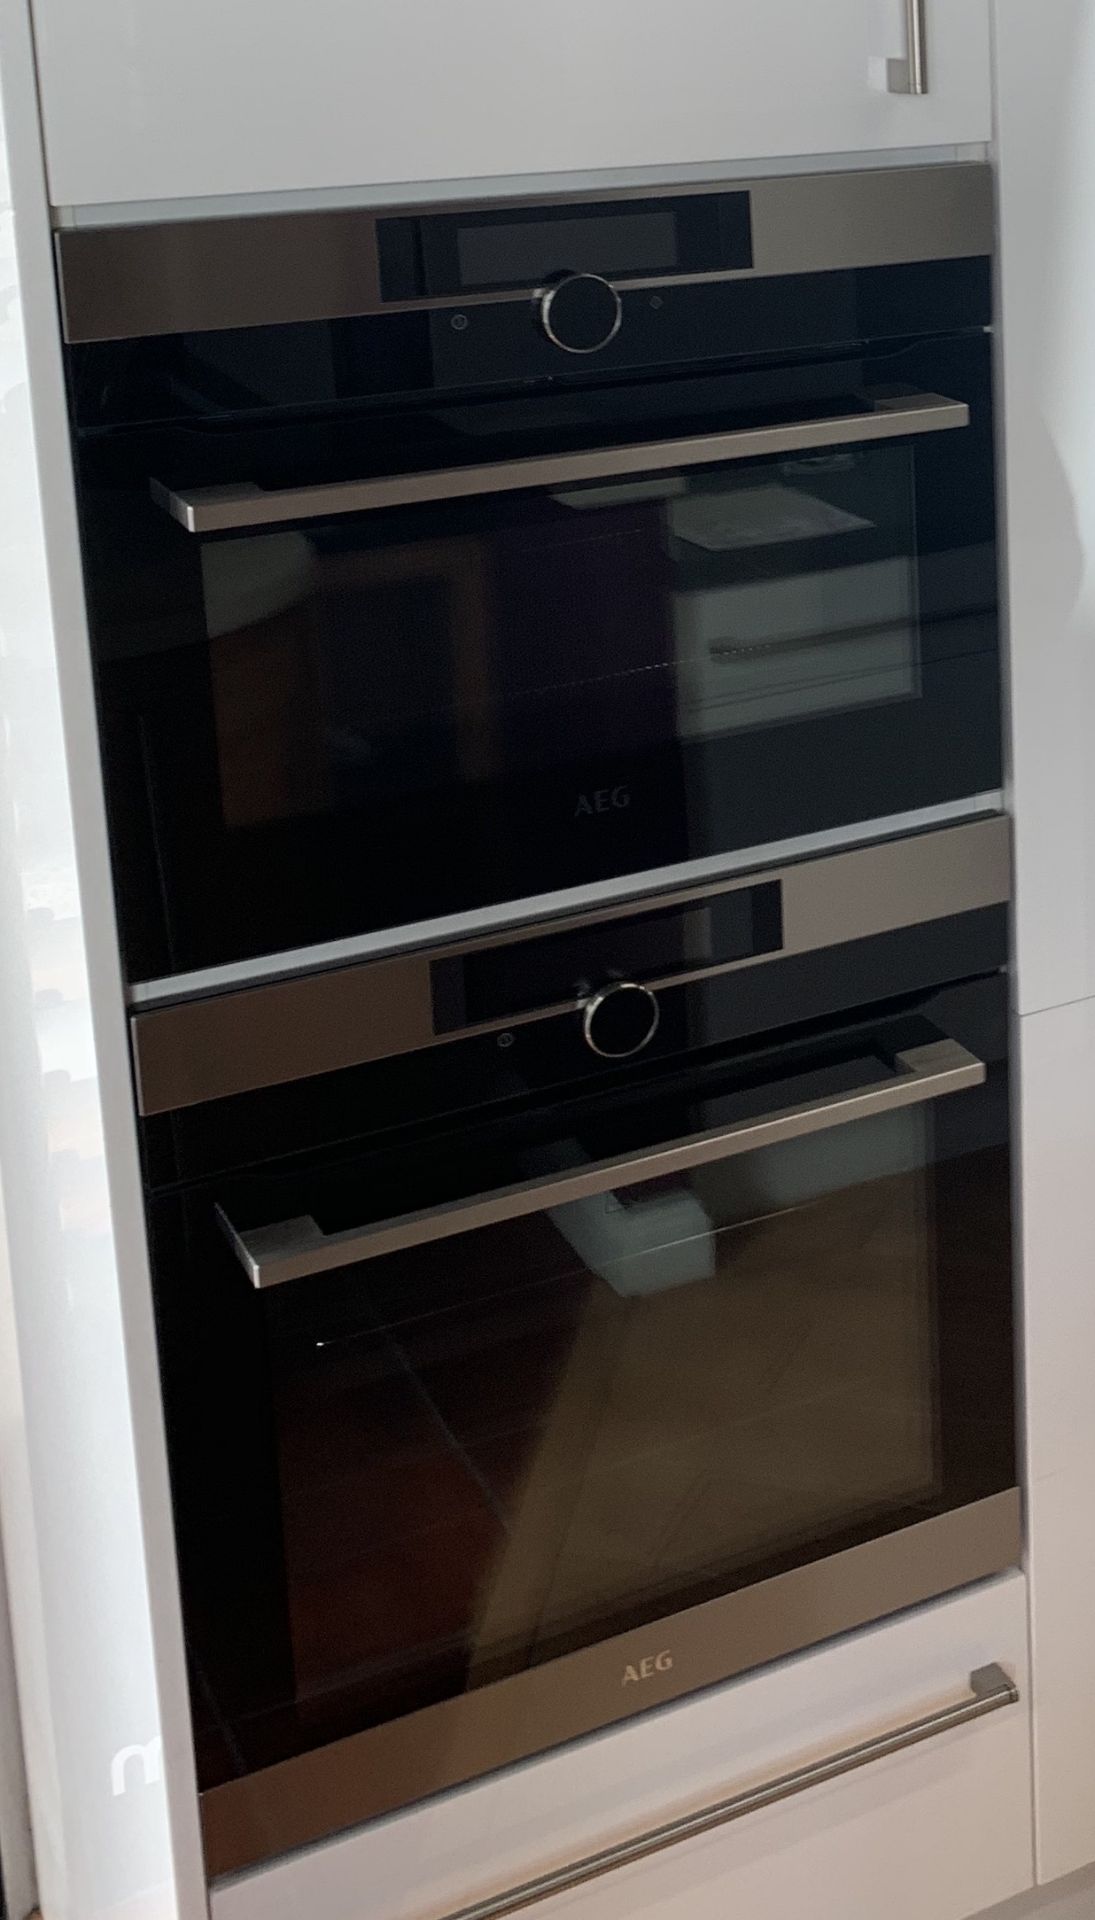 AEG integrated double oven/grill